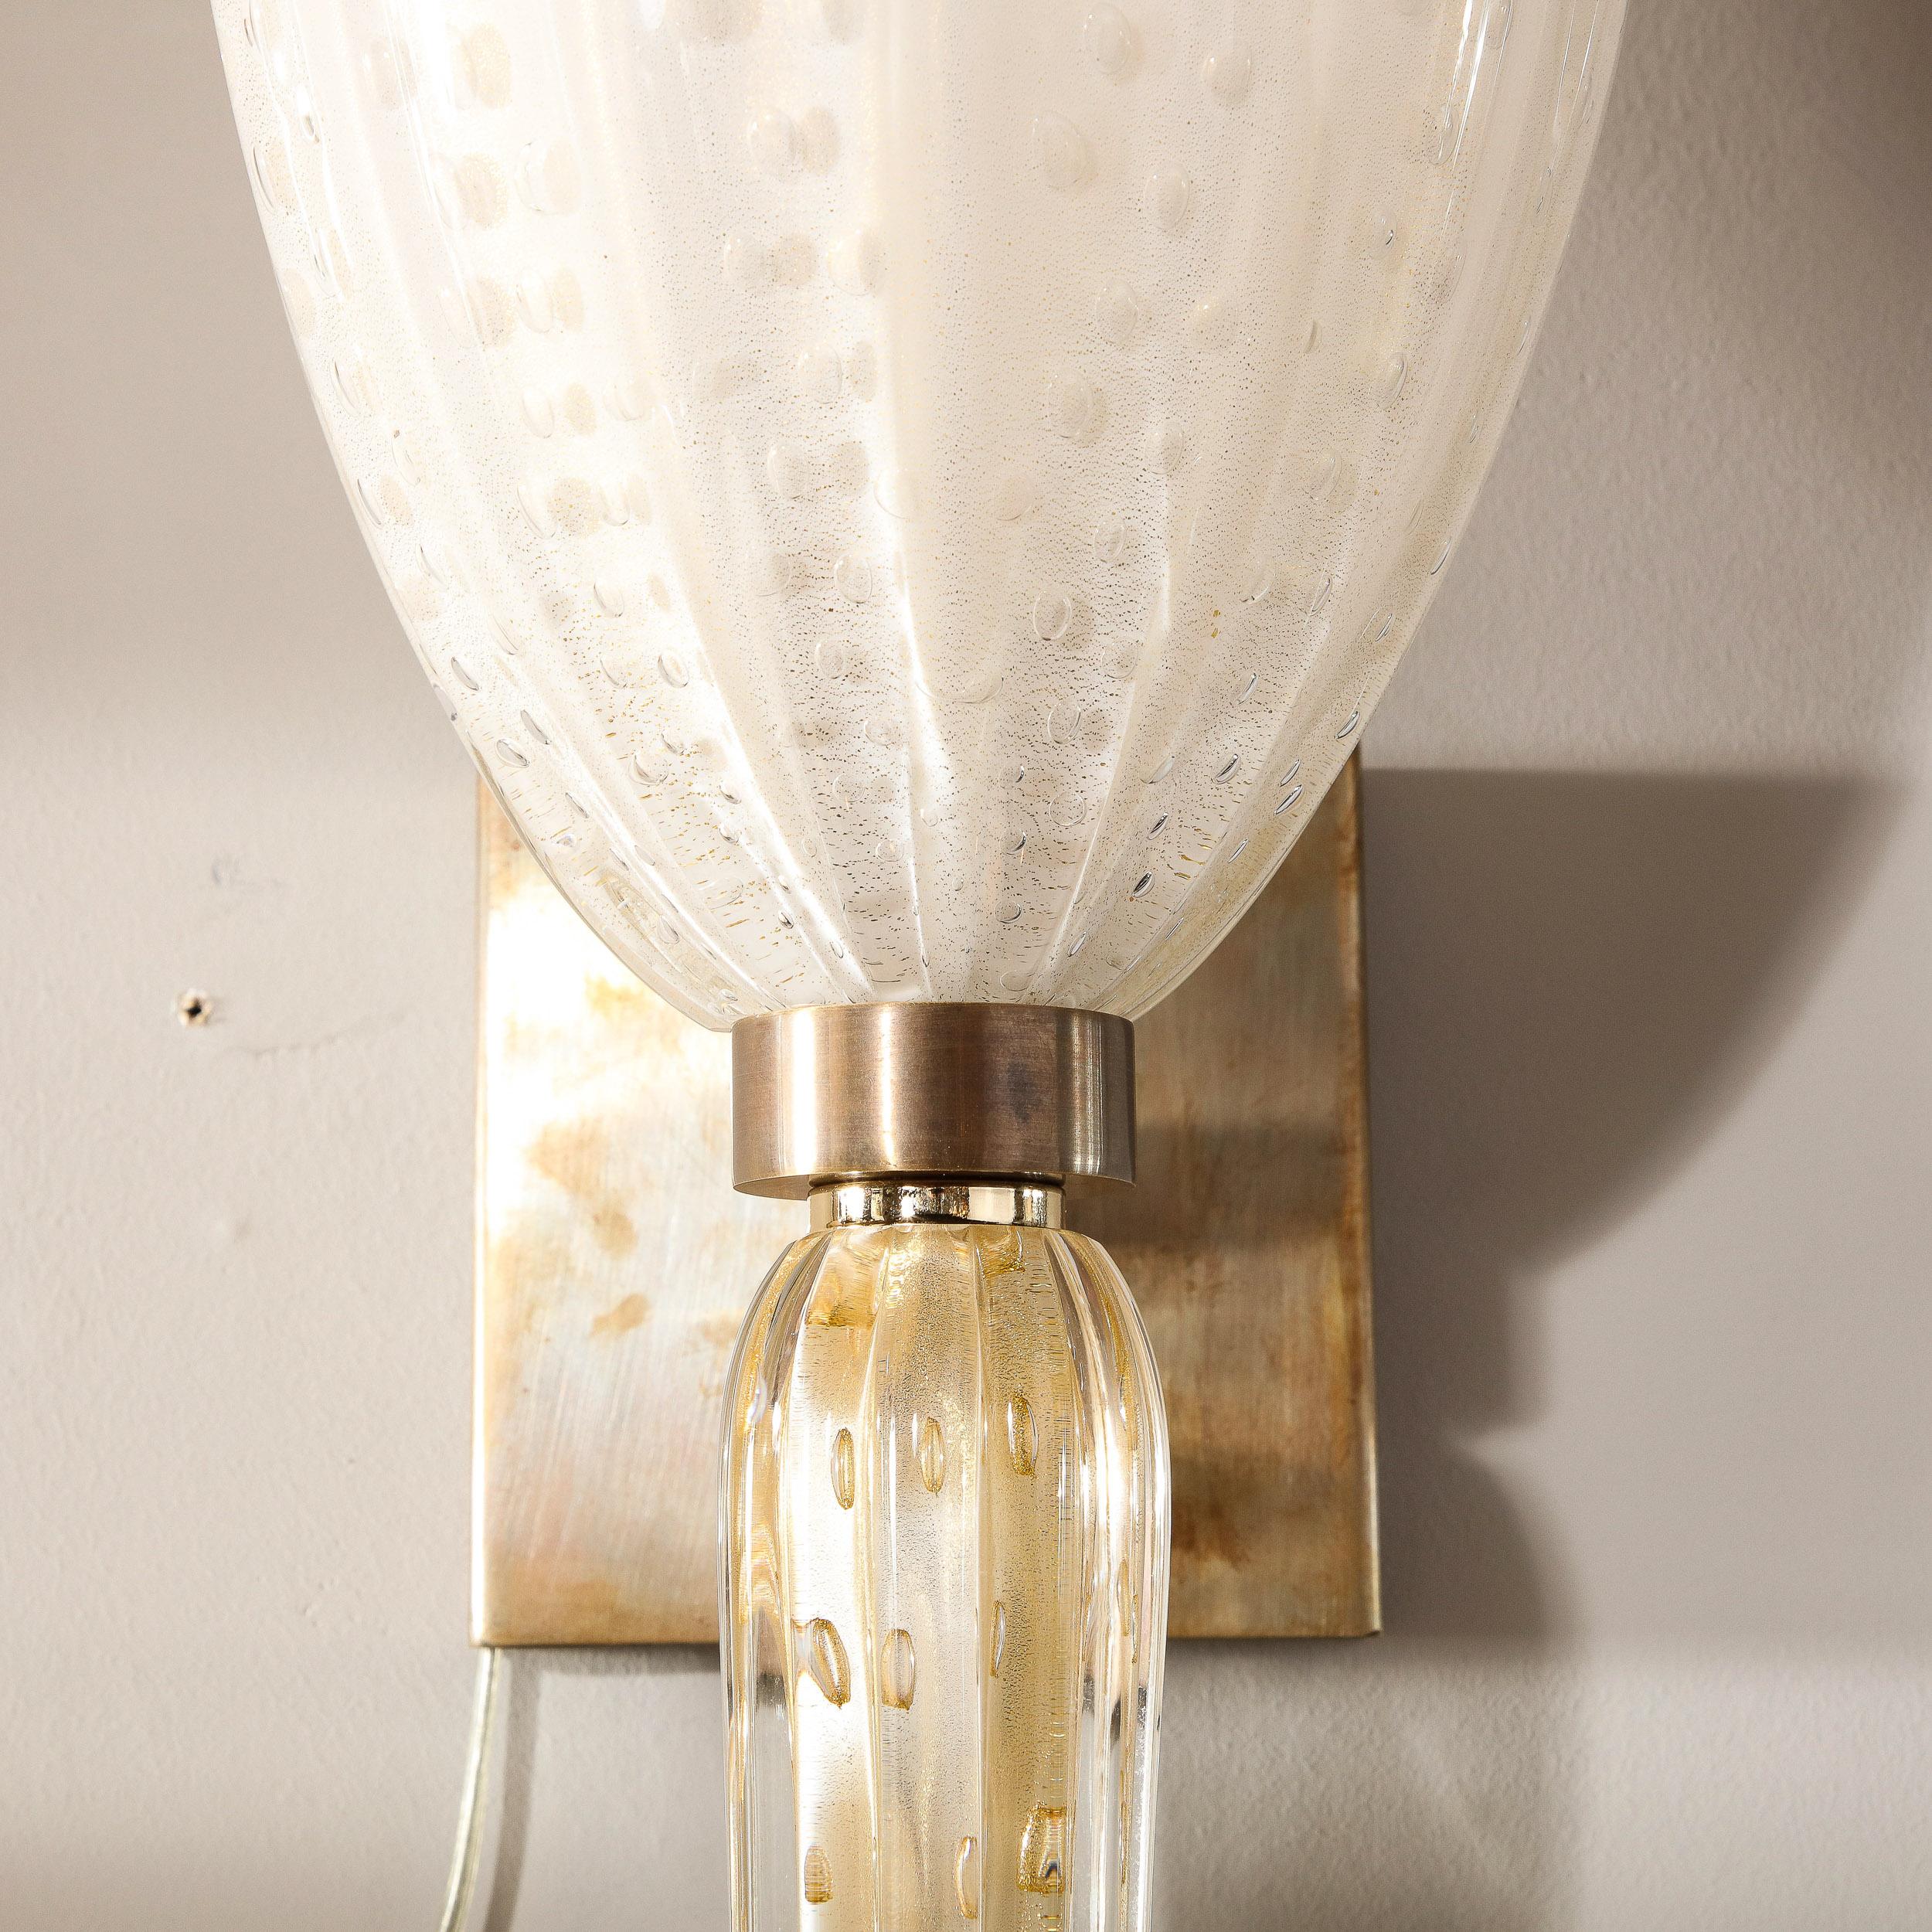 Modernist Hand-Blown Murano Glass Sconces with Murines & 24K Gold Flecks  For Sale 7